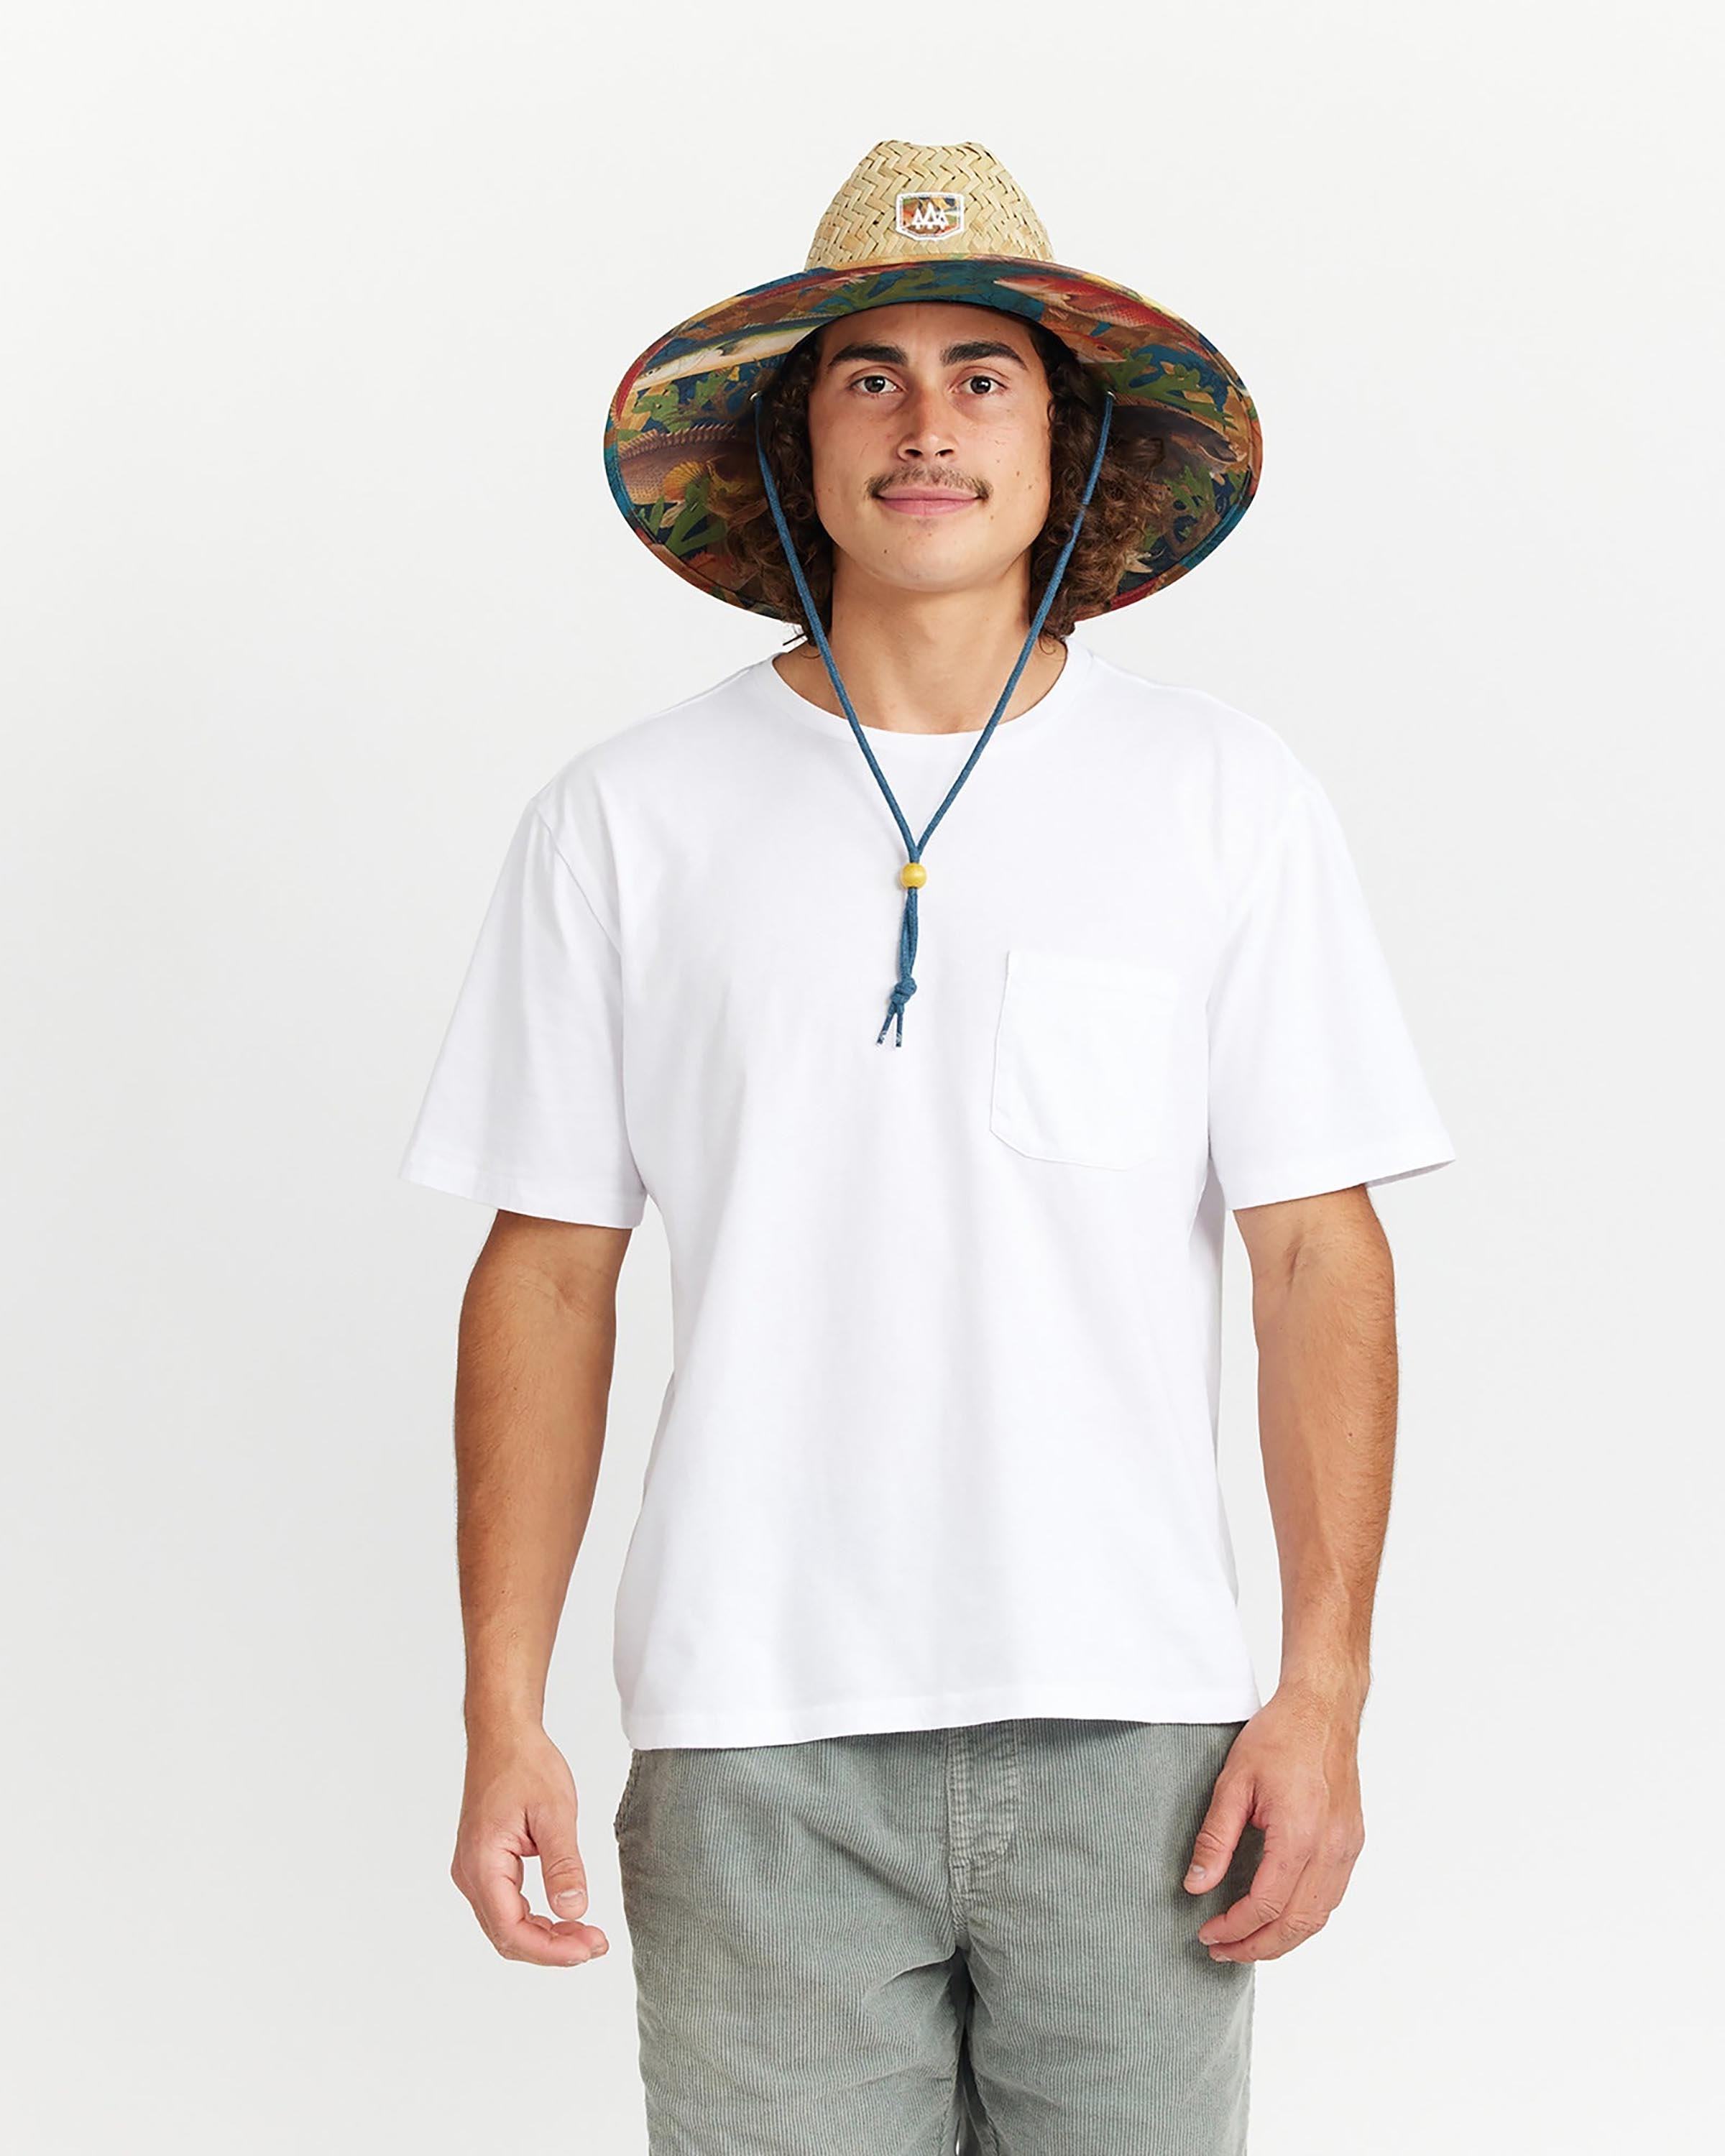 Mariner - undefined - Hemlock Hat Co. Lifeguards - Adults